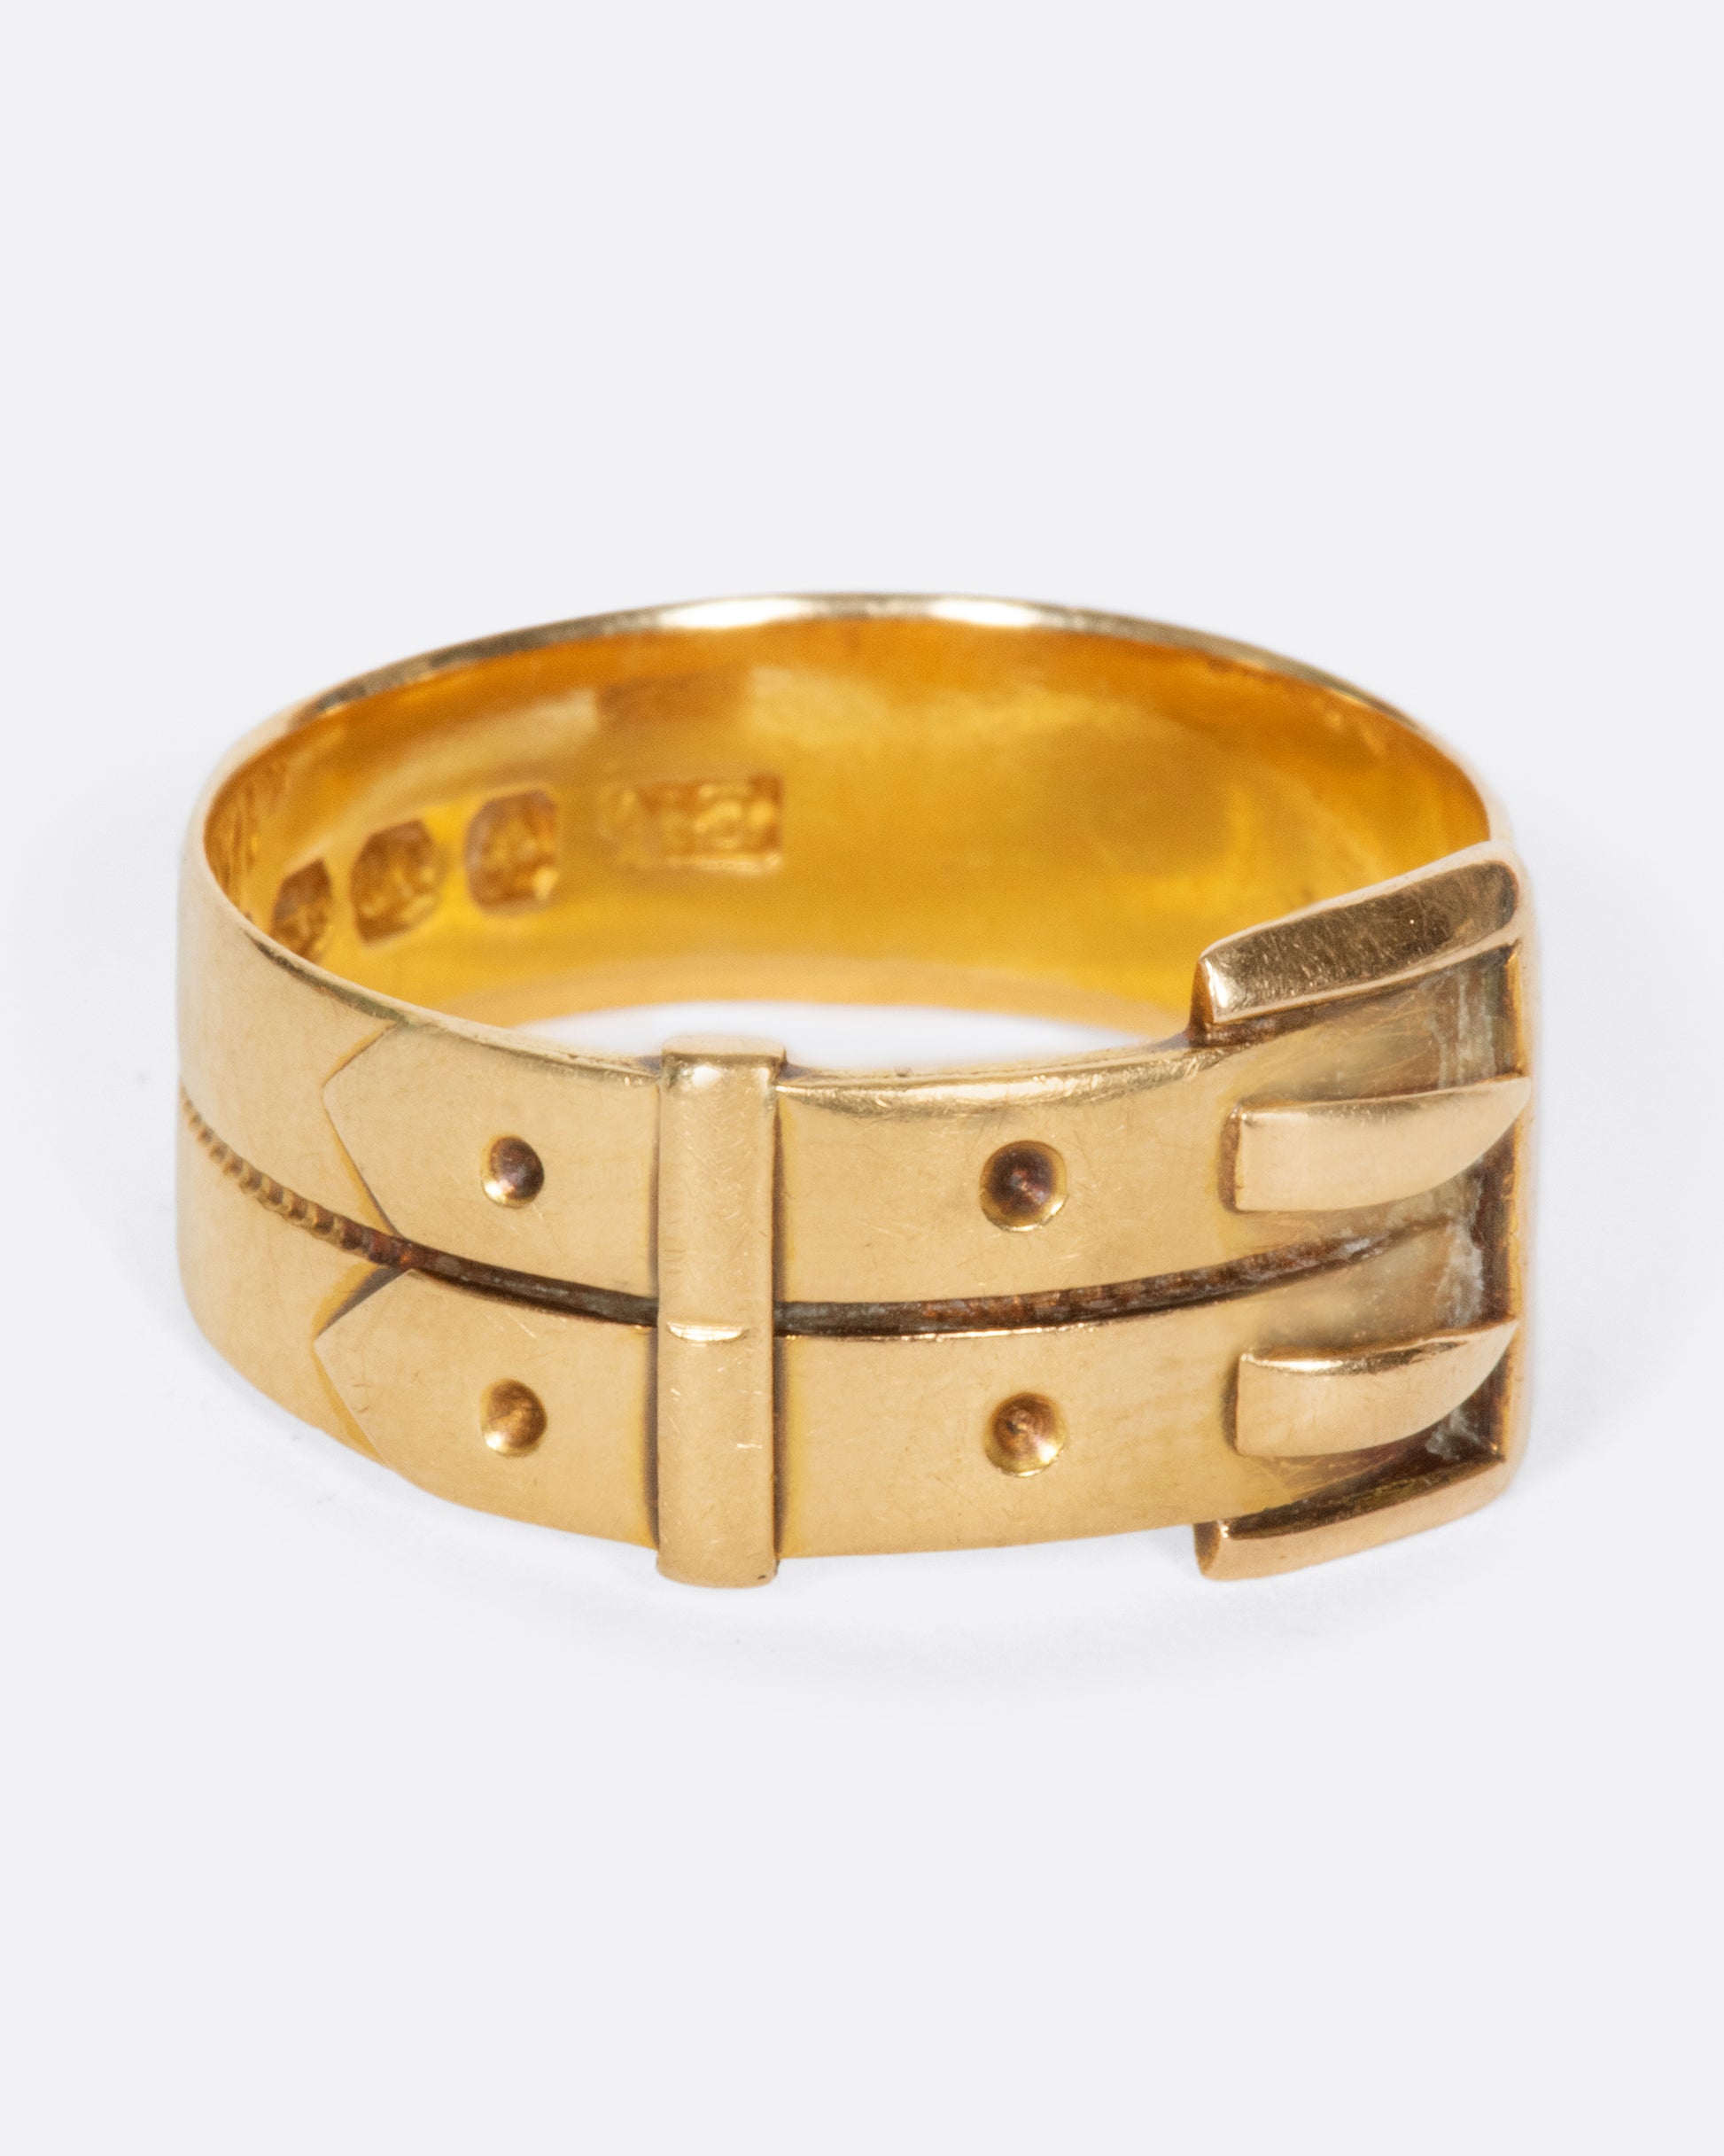 A vintage yellow gold belt buckle ring with two buckles.